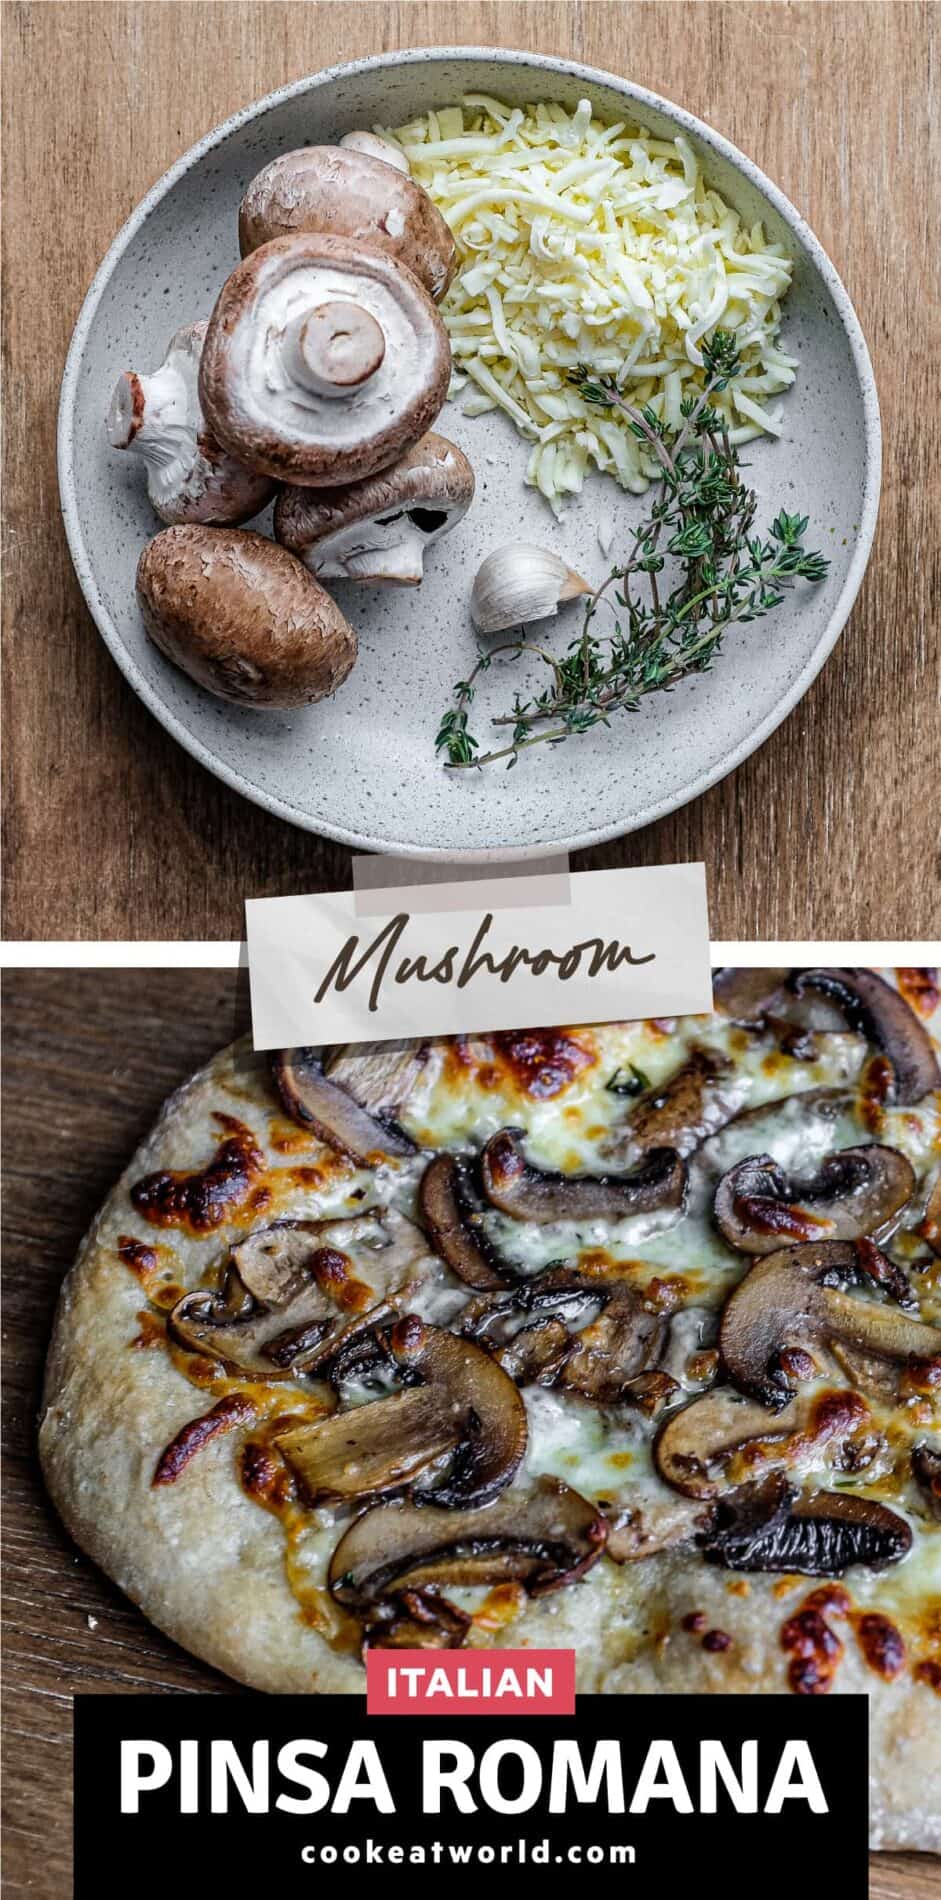 Top picture: a bowl of mushroom, garlic, mozzarella cheese and thyme. Bottom Picture: A mushroom pinsa